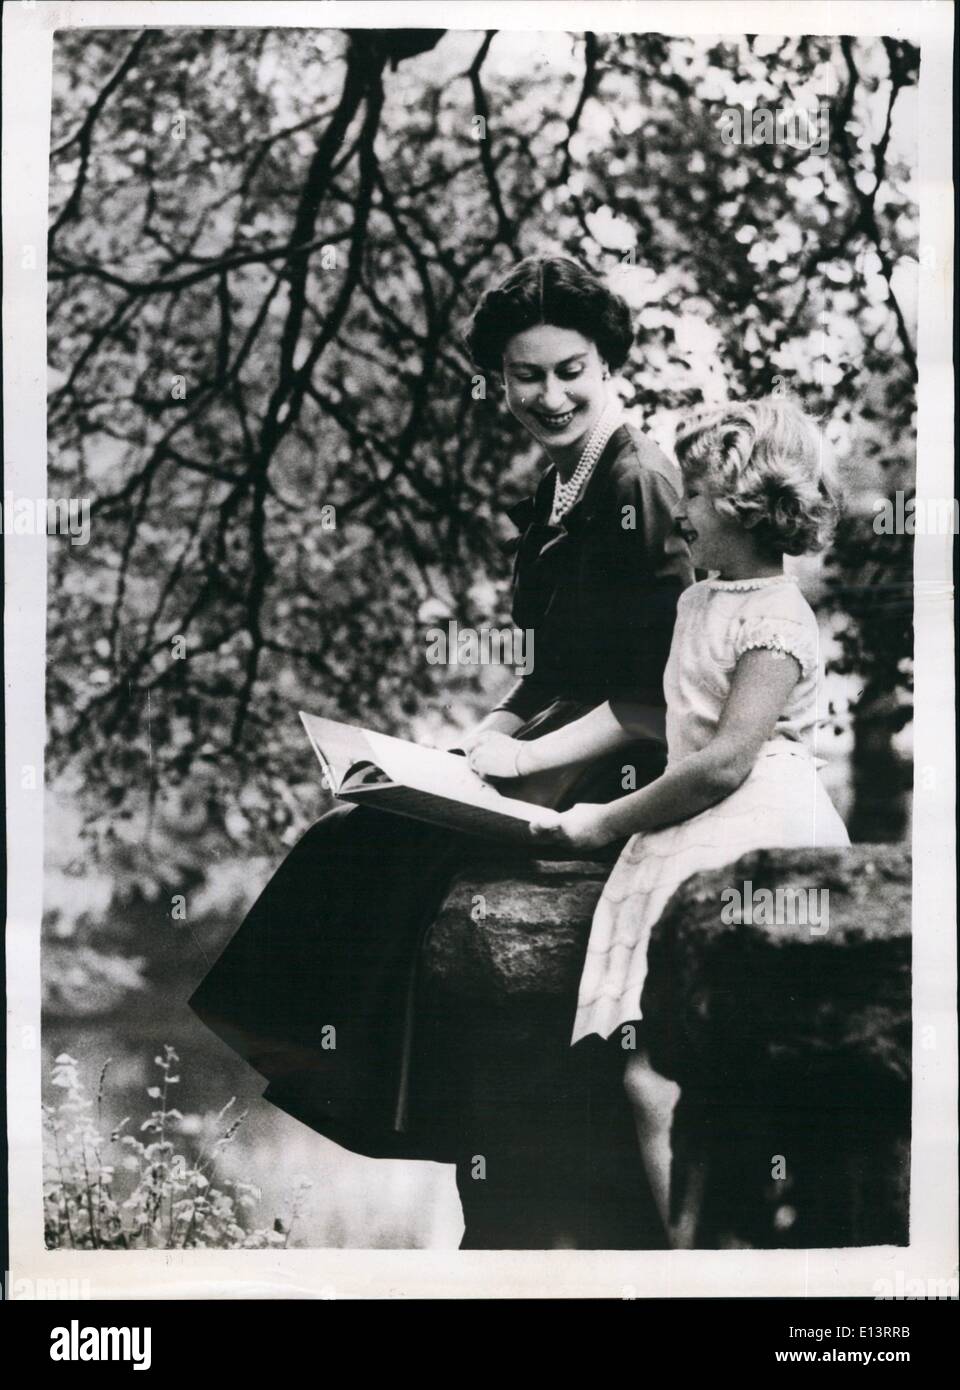 Mar. 27, 2012 - Seventh birthday of H.R.H. Princes Anne. Picture in grounds of Buckingham Palace: Princess Anne is pictured with her mother H.M. The Queen Elizabeth II, in the ground of Buckingham Palace. The Princess, whose seventh birthday is celebrated on 15th. August - is wearing a pale green dress trimmed with pink and white. the Queen is wearing a sapphire blue silk afternoon dress with four rows of pearls. Stock Photo